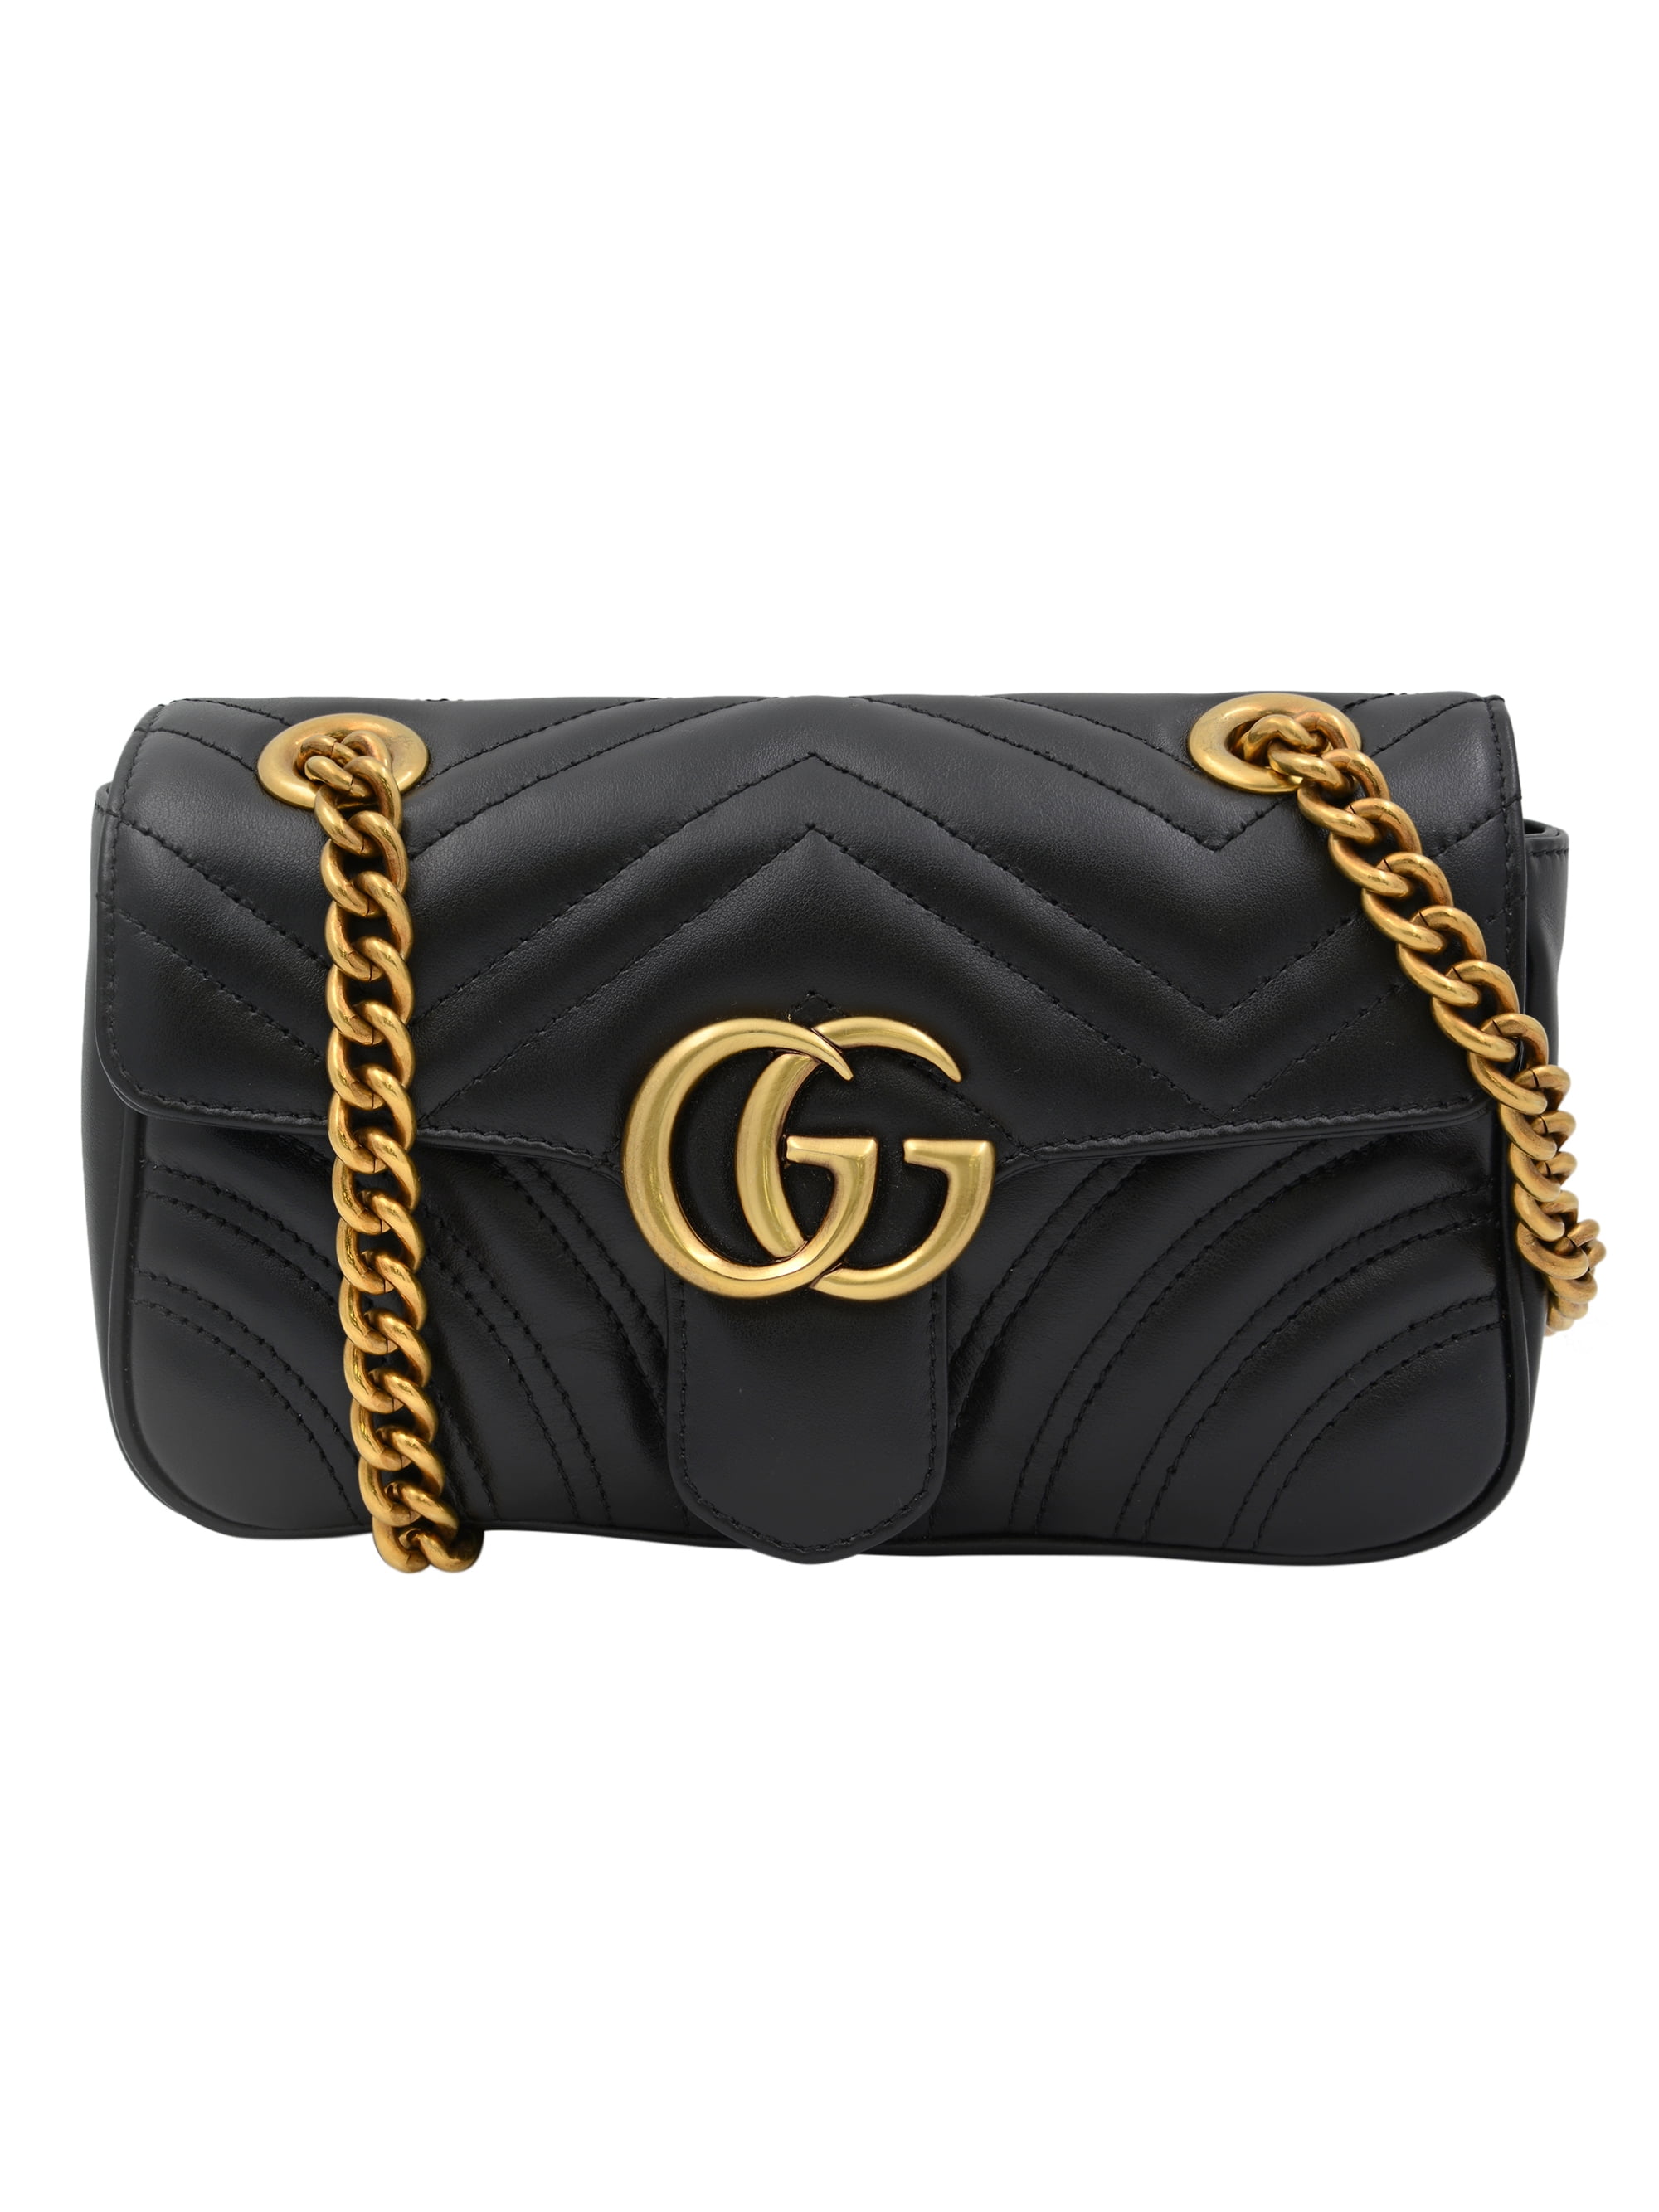 Gucci GG Marmont Small Shoulder Bag, Black, Leather